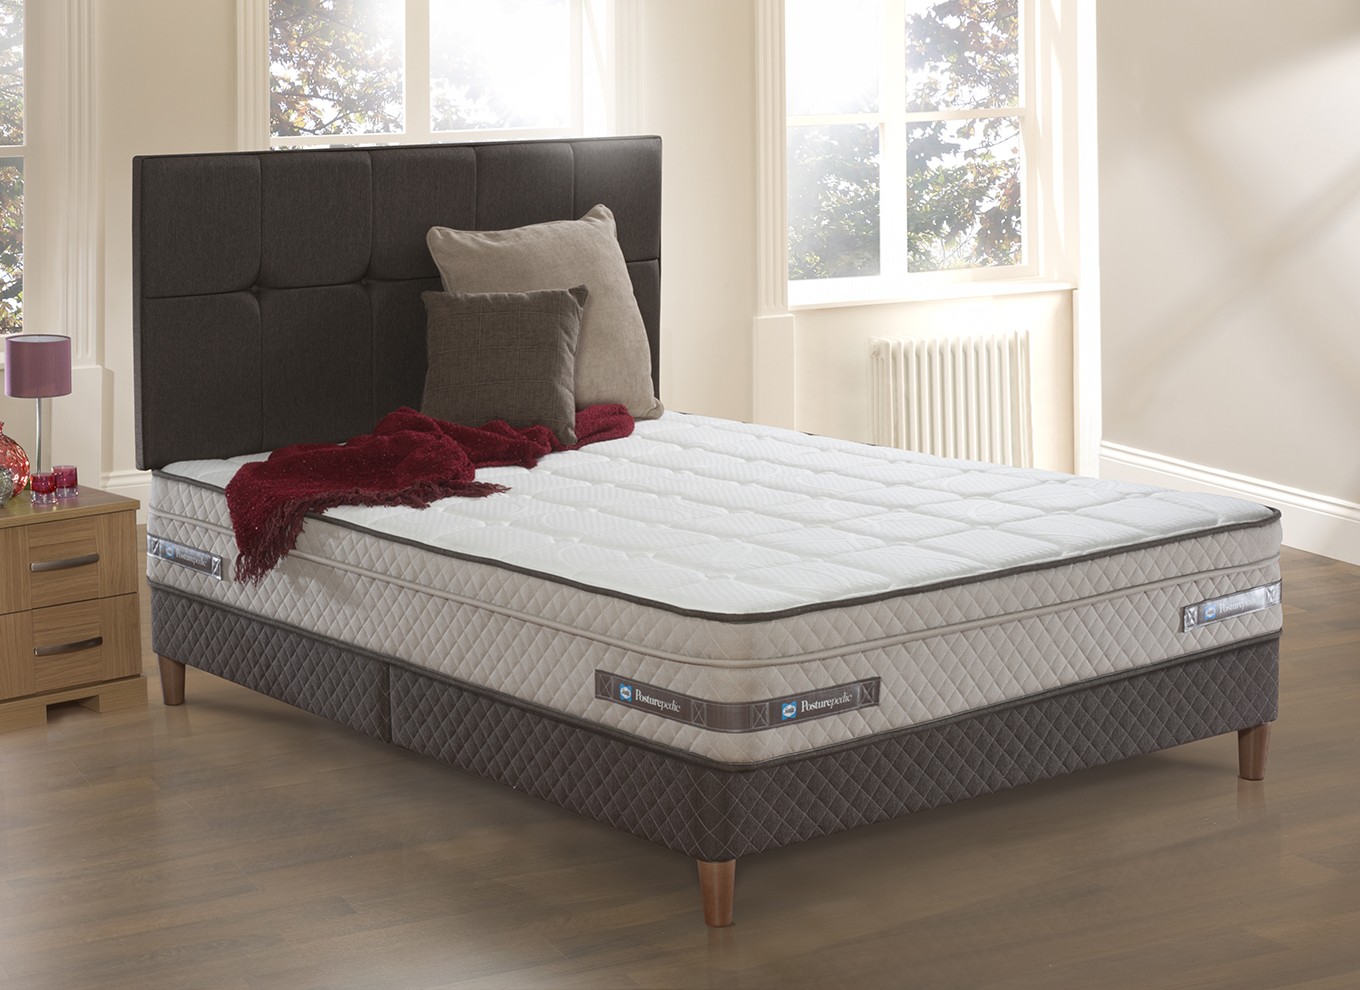 4`6 Double Sealy Pattison Posturetech Spring Divan Bed with